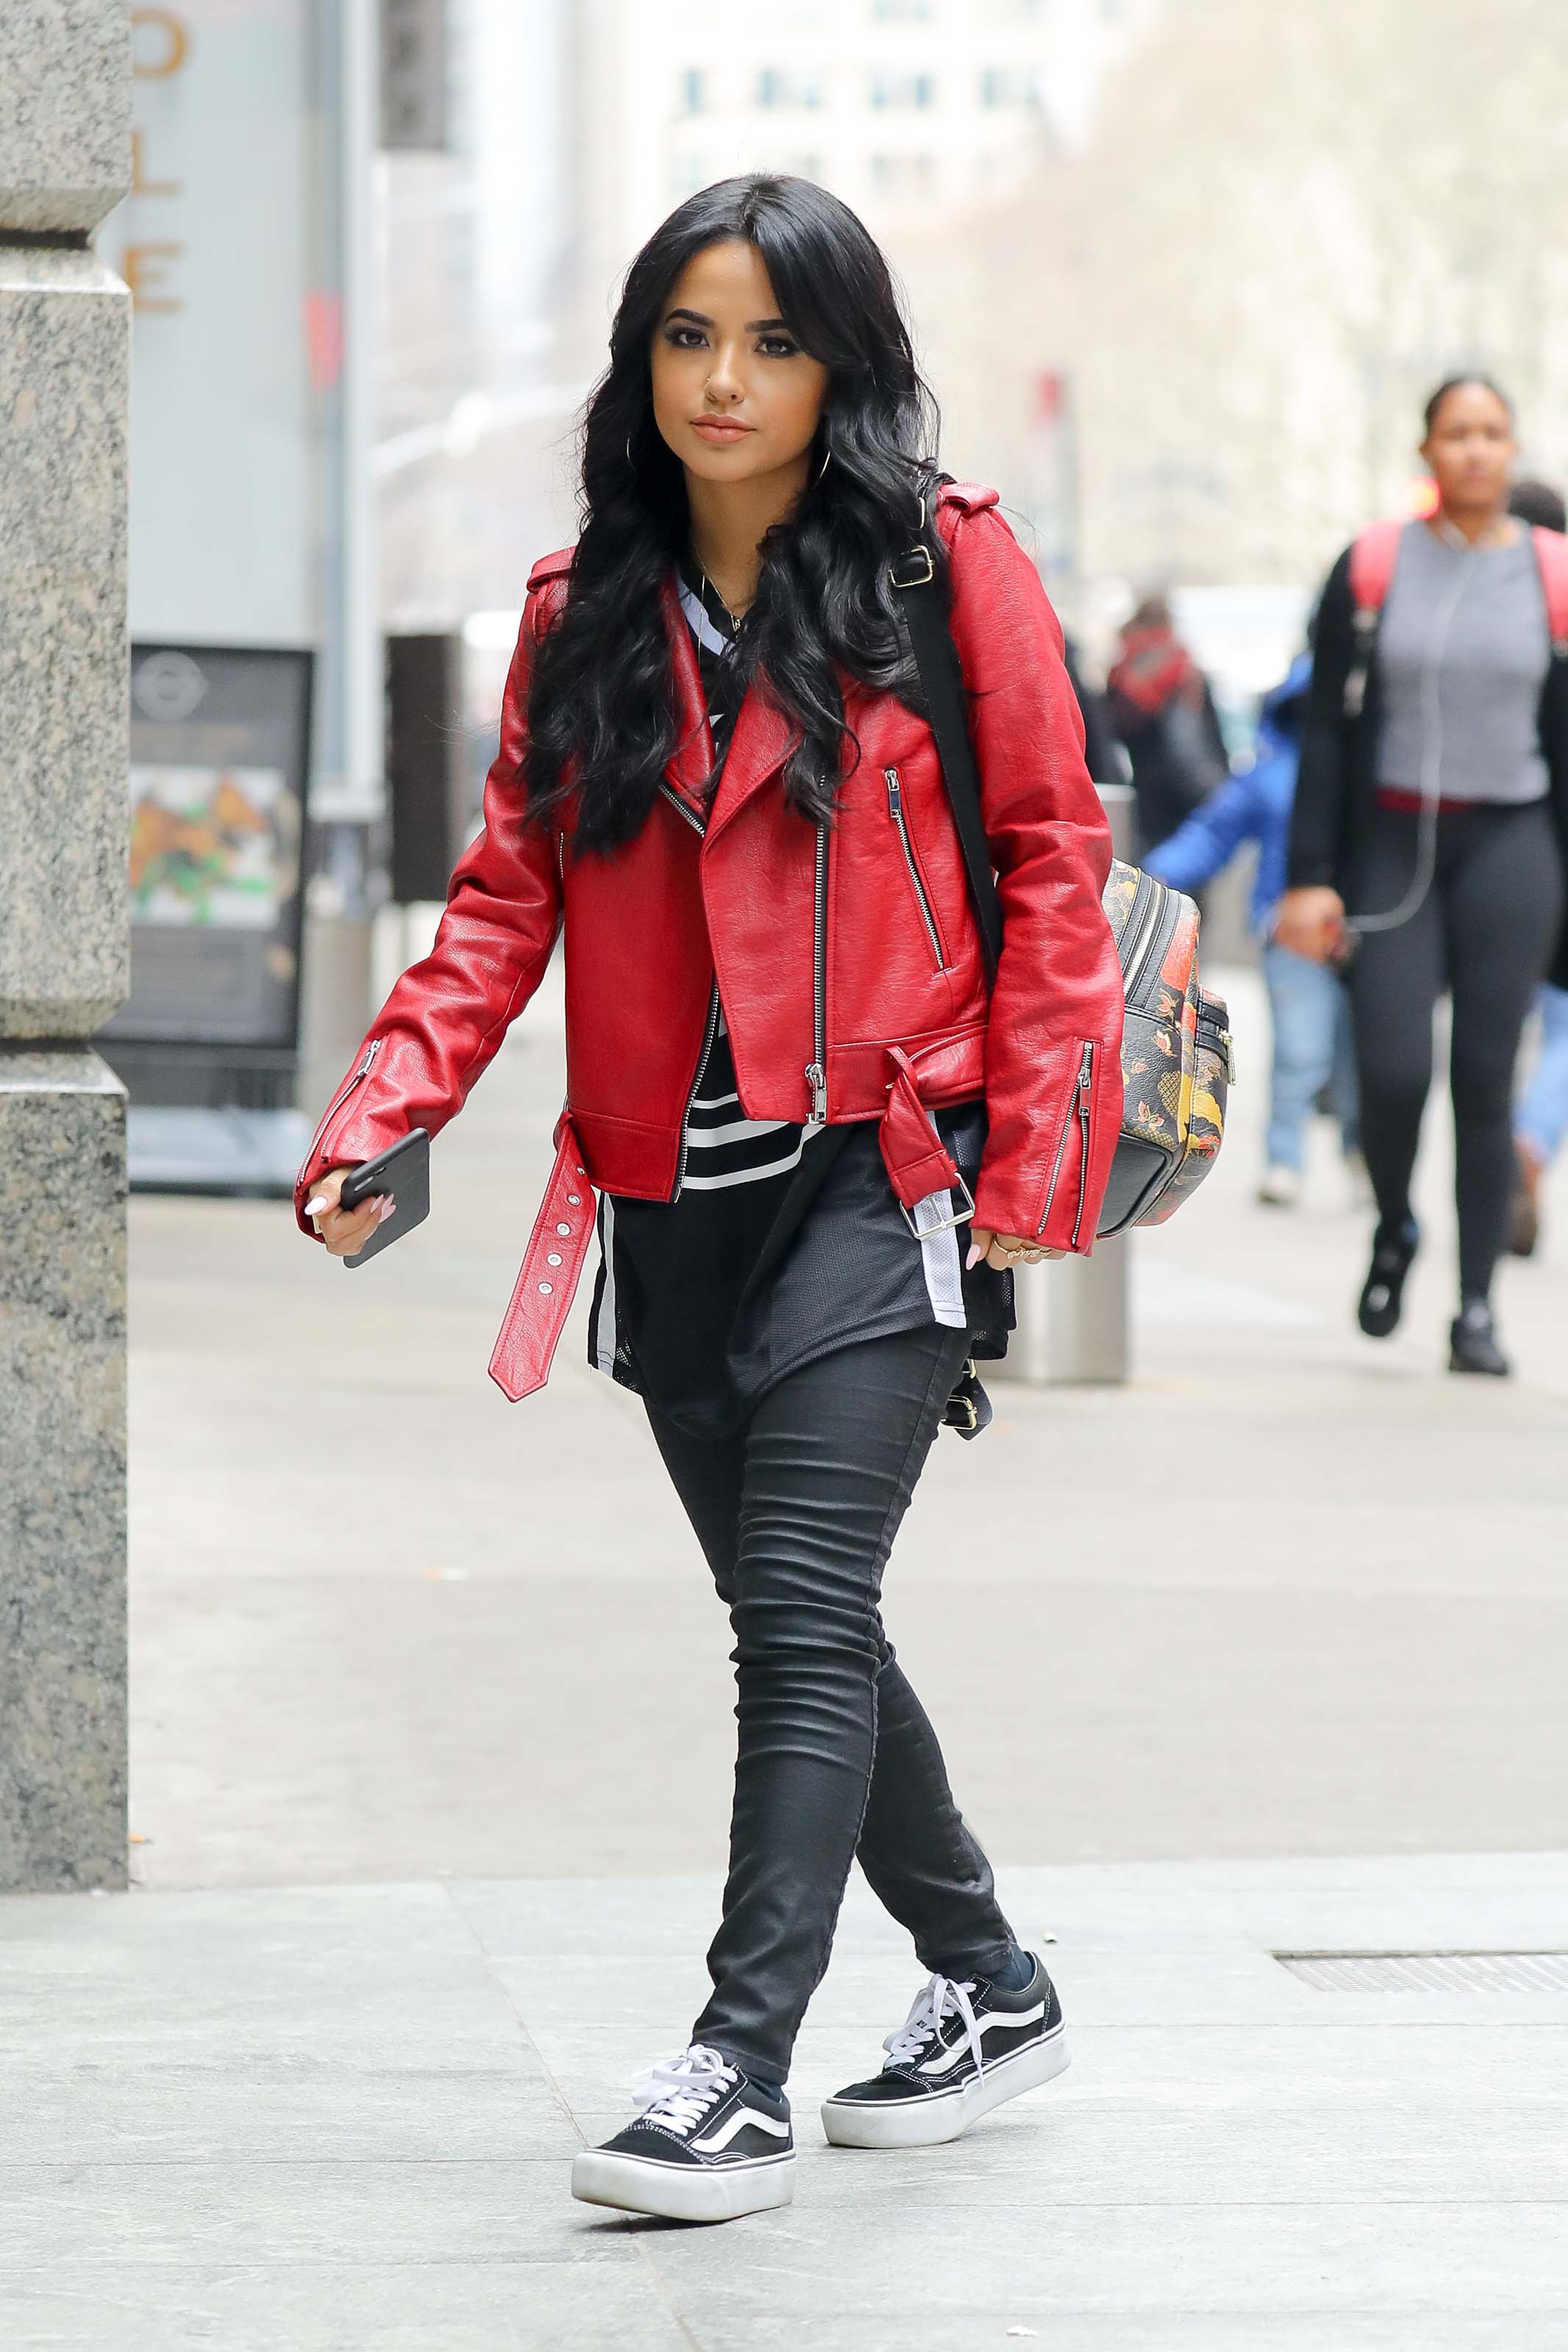 Becky G out and about in a cold day in NYC